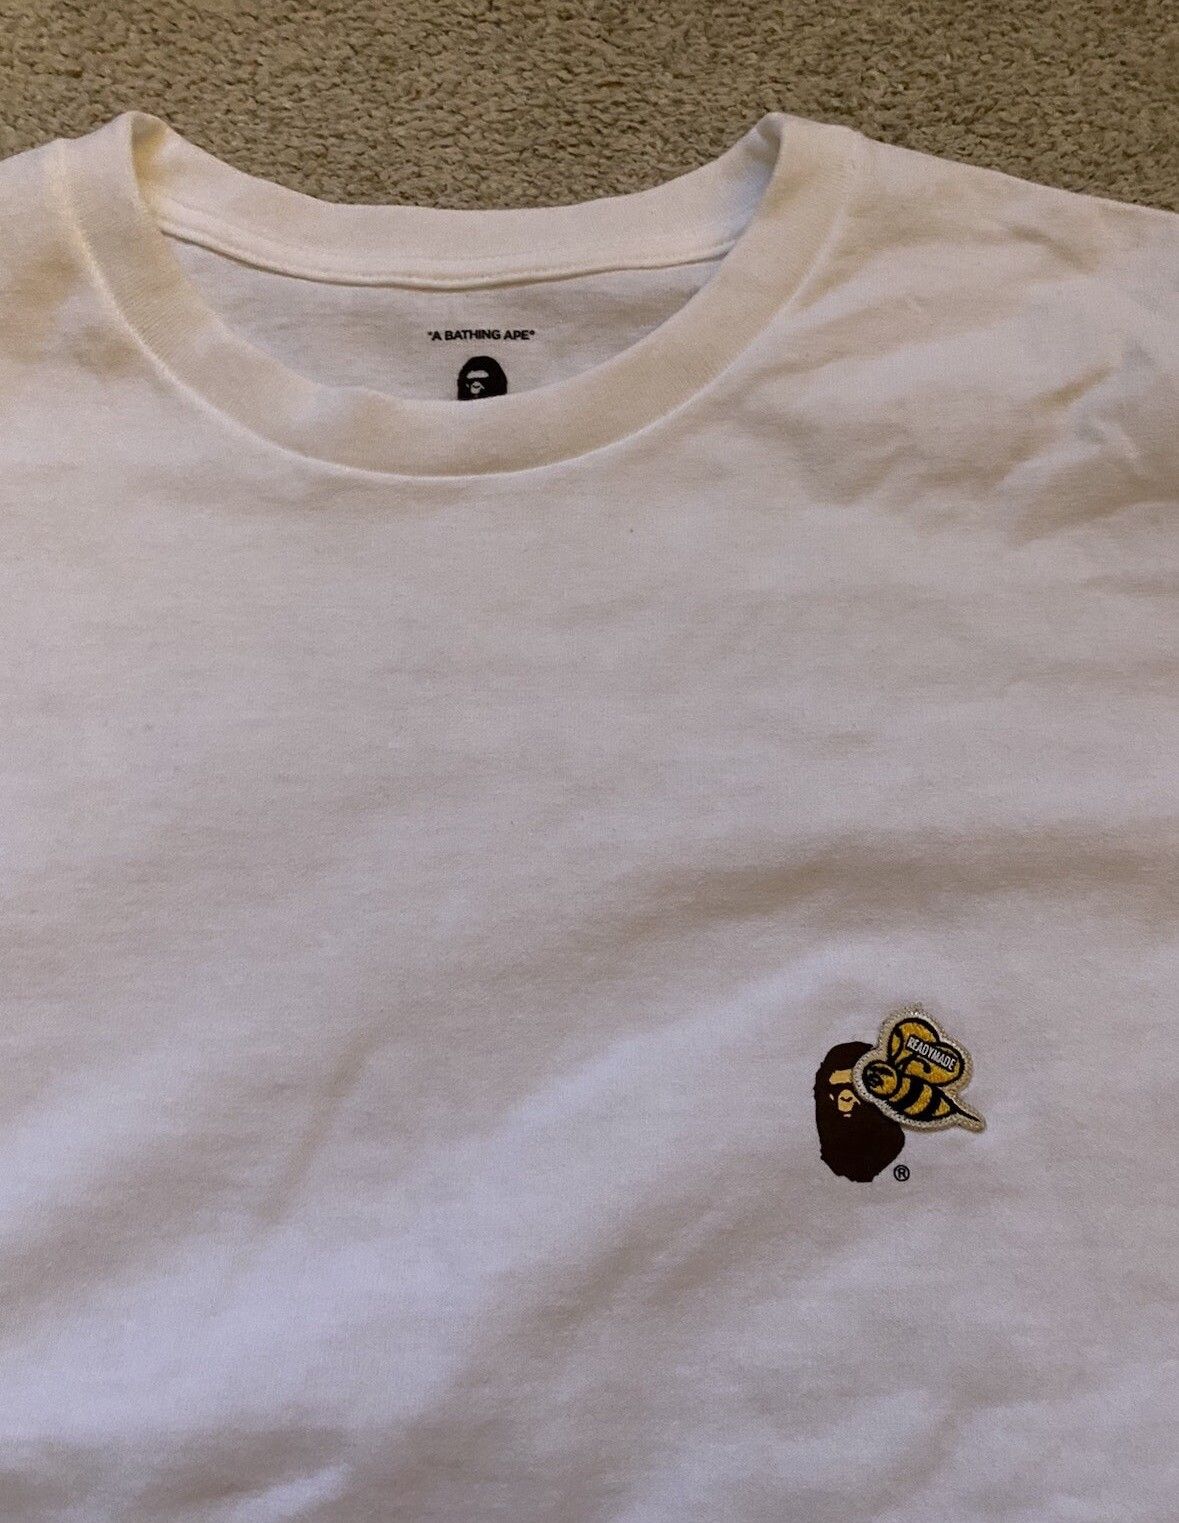 Bape in Null, Men's (Size Large) Product Image